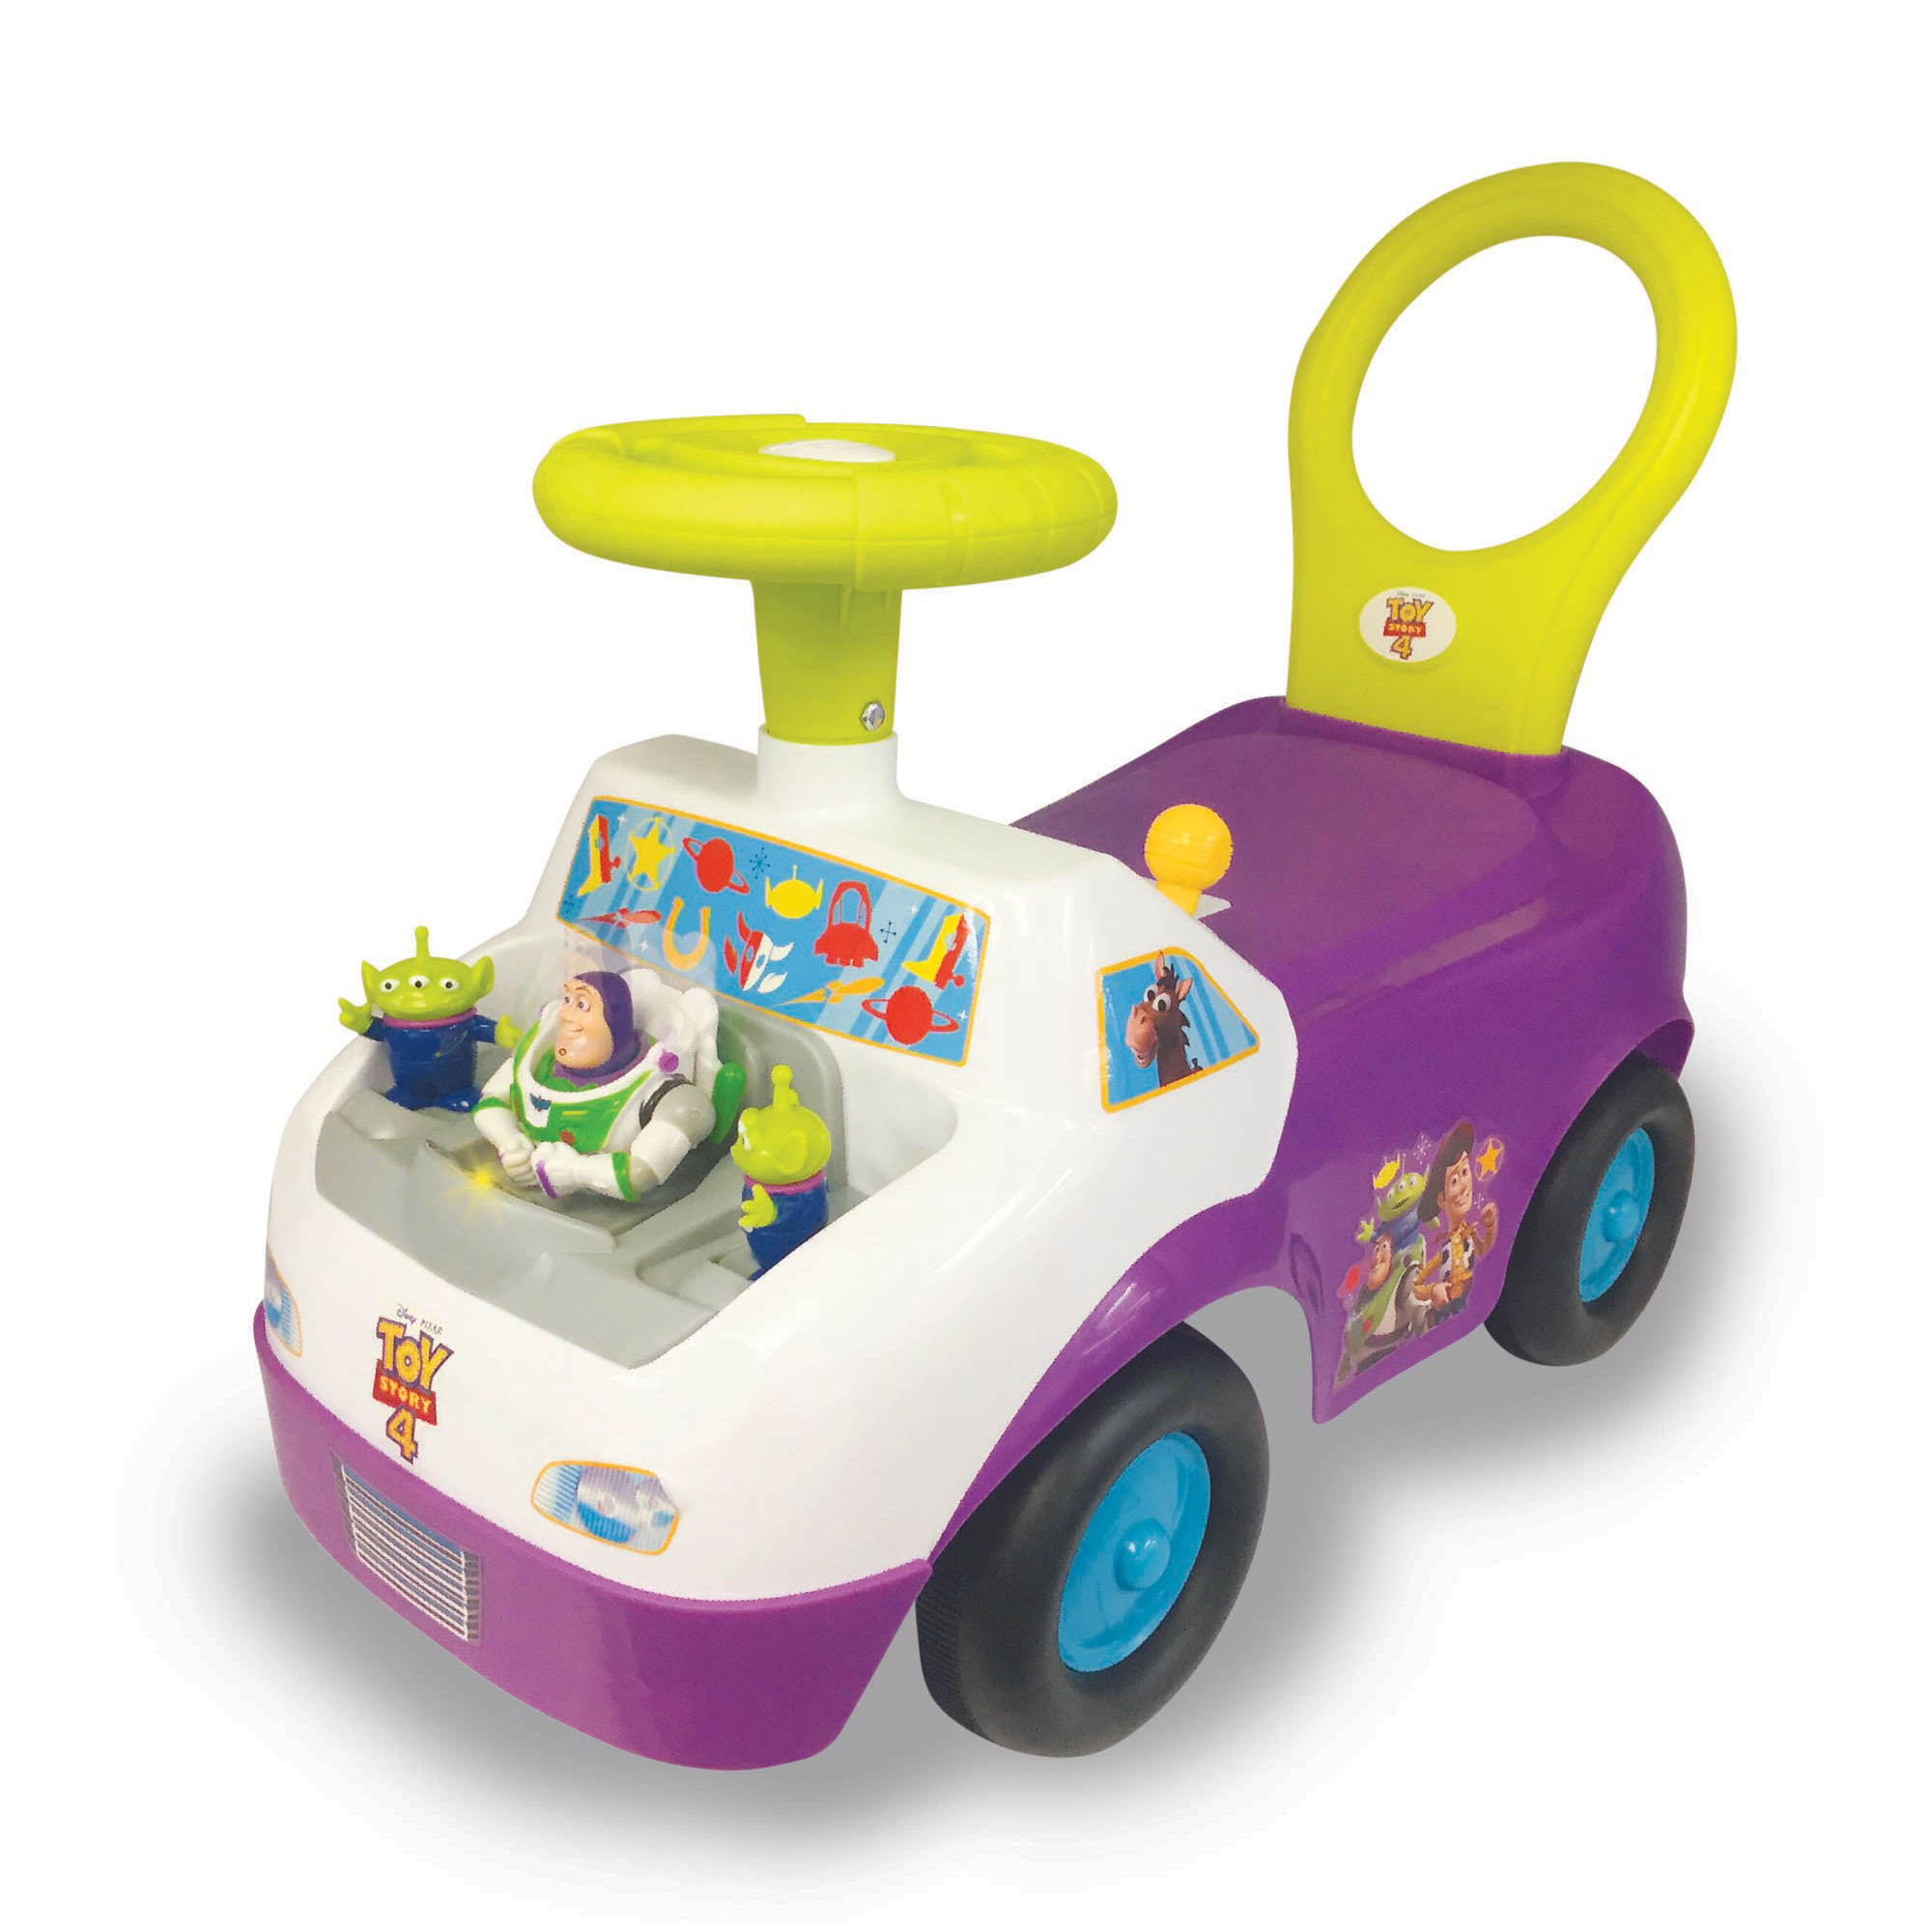 toy story 4 ride on car